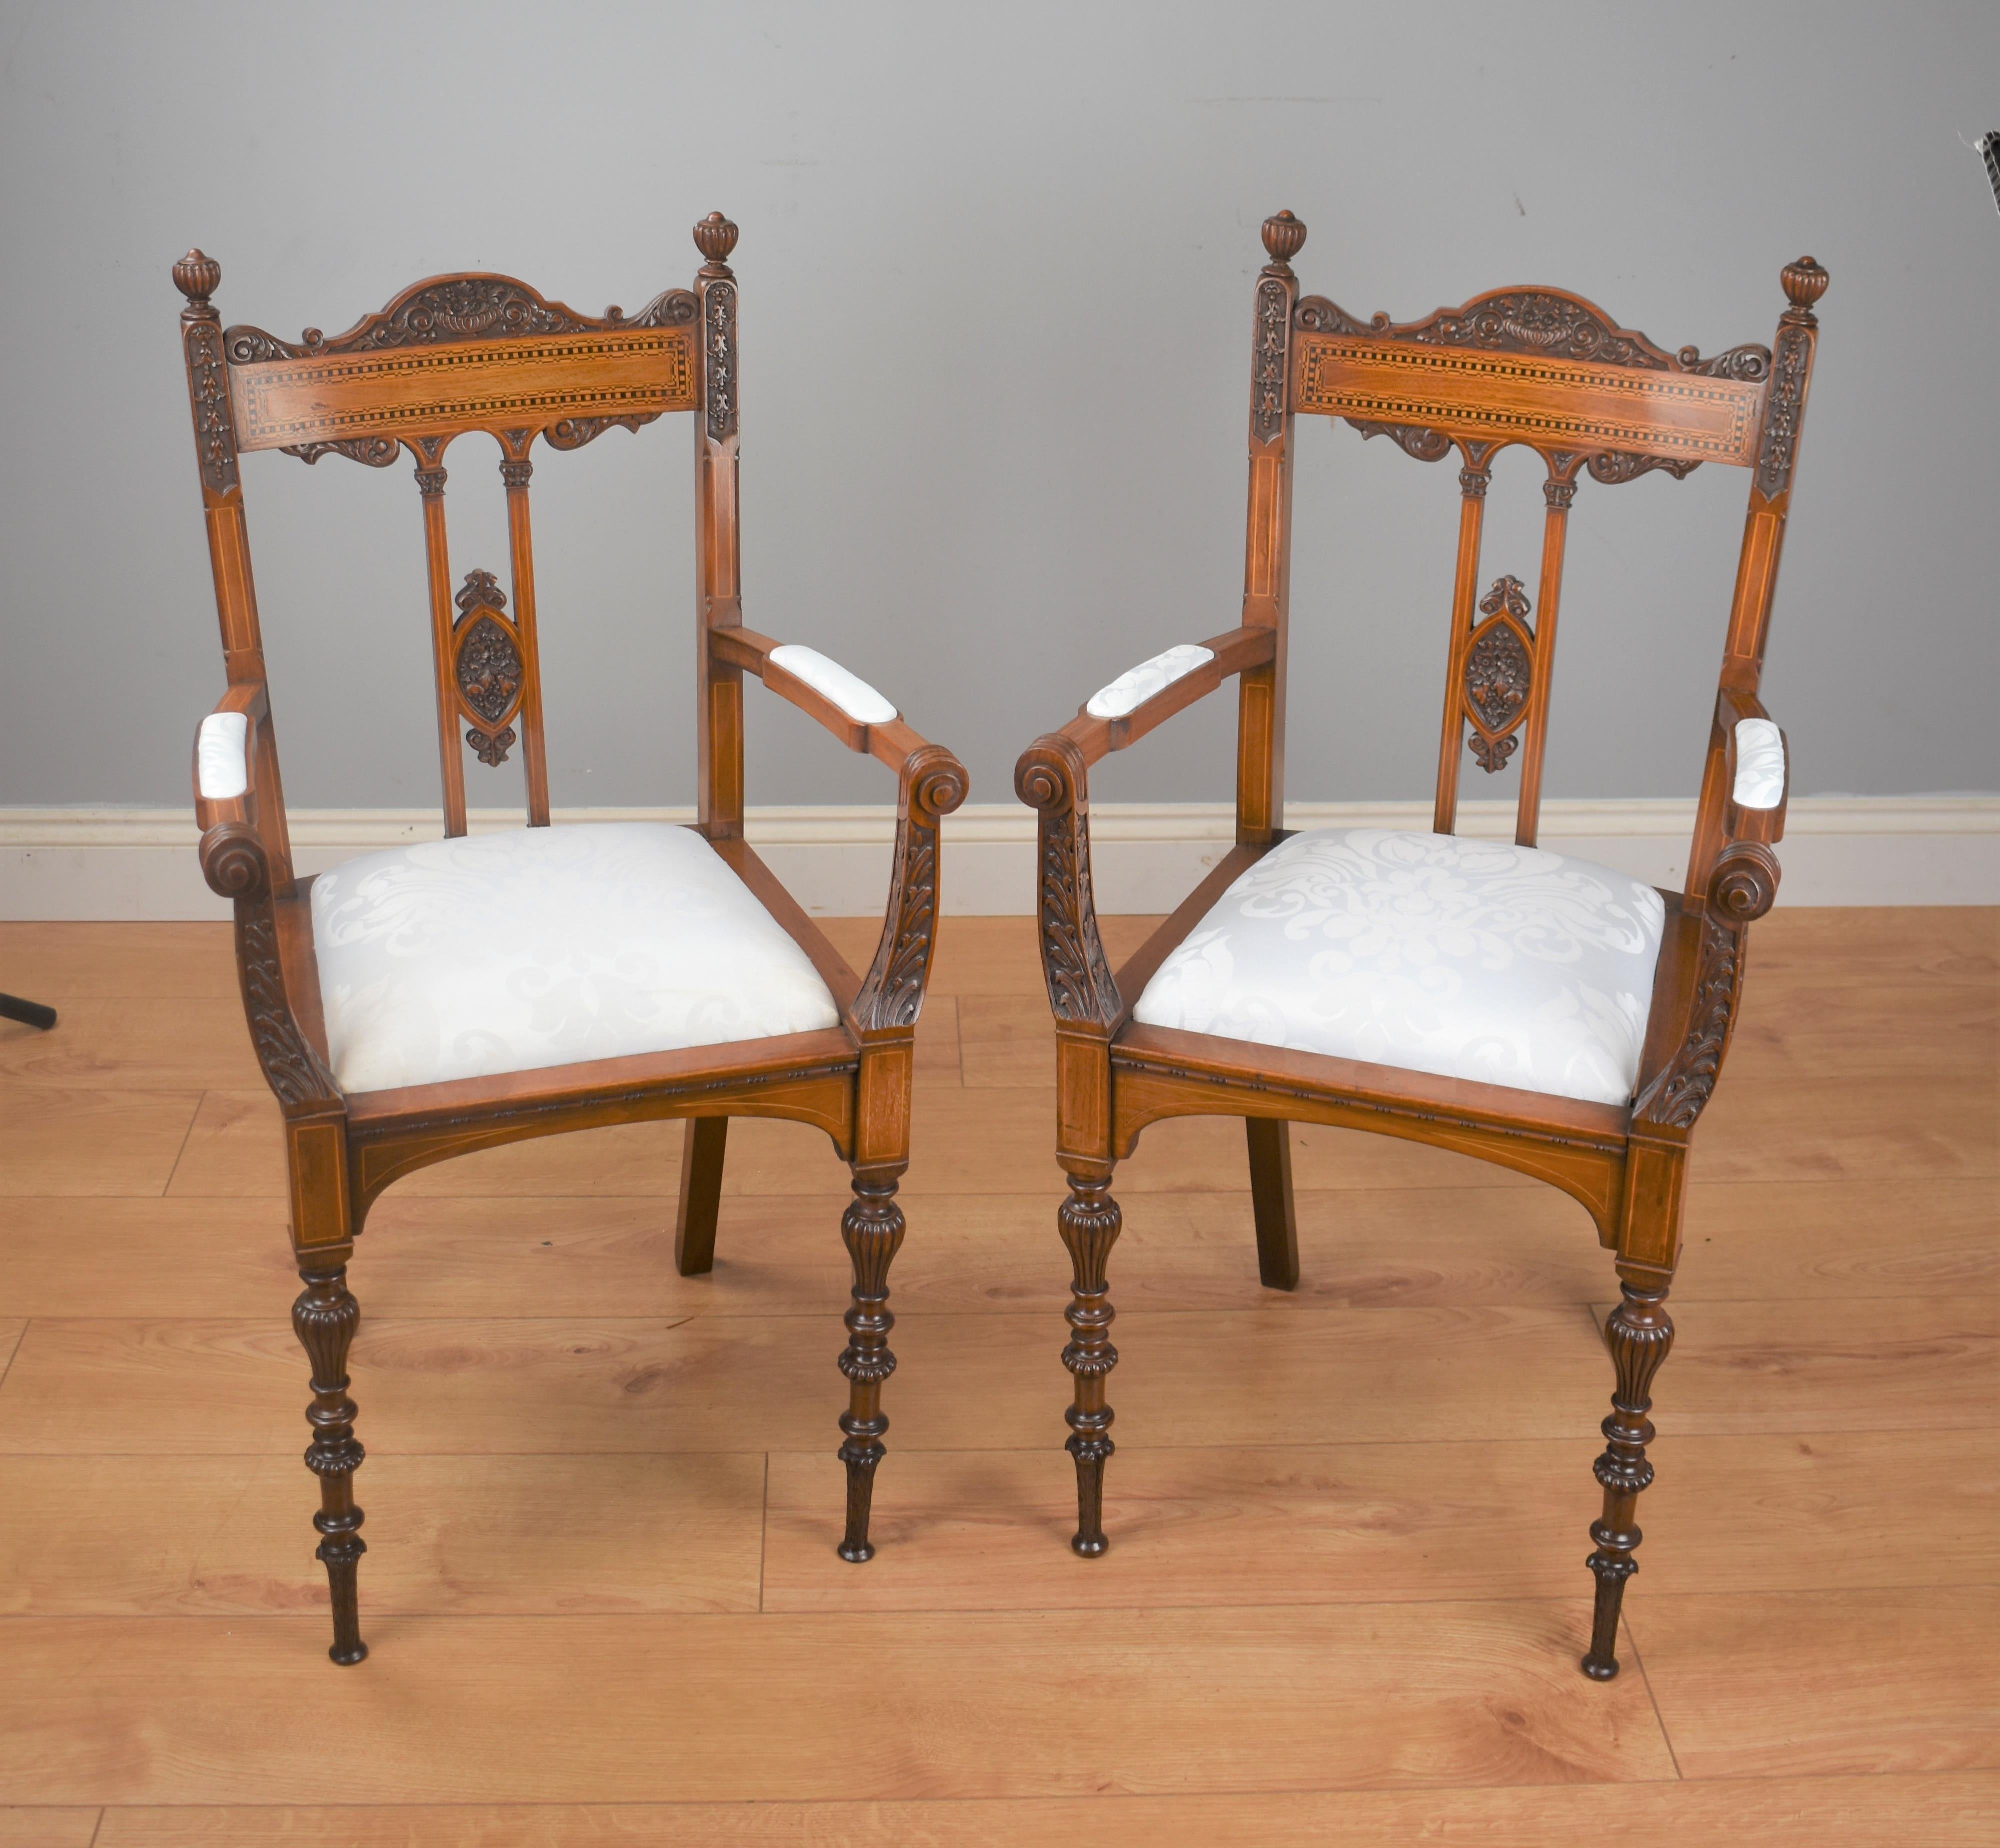 A pair of Victorian inlaid mahogany chairs of exhibition quality attributed to James Shoolbred, a good example of fine hand carving, the seats are upholstered in a white patterened material.

Dimensions:
 Width 20